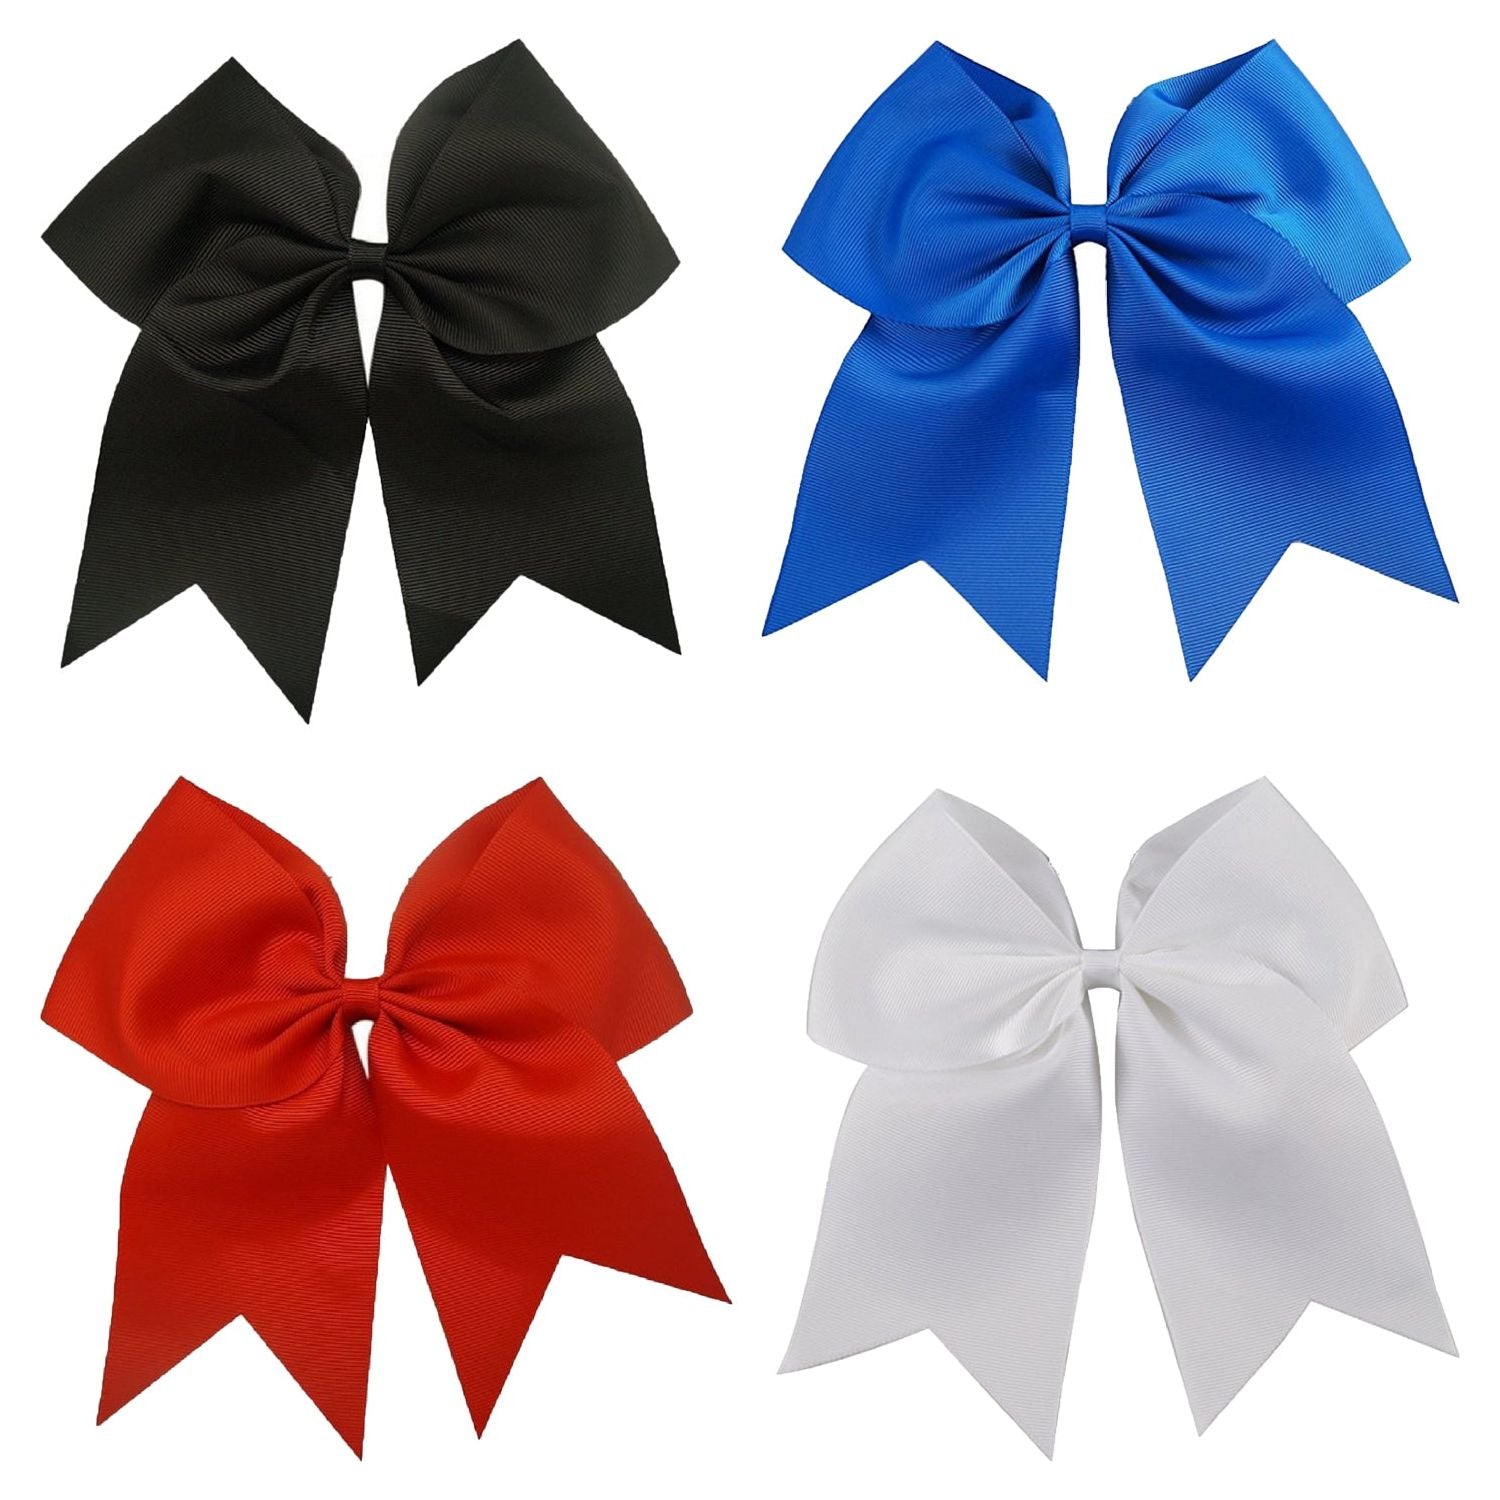 Red Cheer Bow for Girls Large Hair Bows with Ponytail Holder Ribbon | Kenz Laurenz